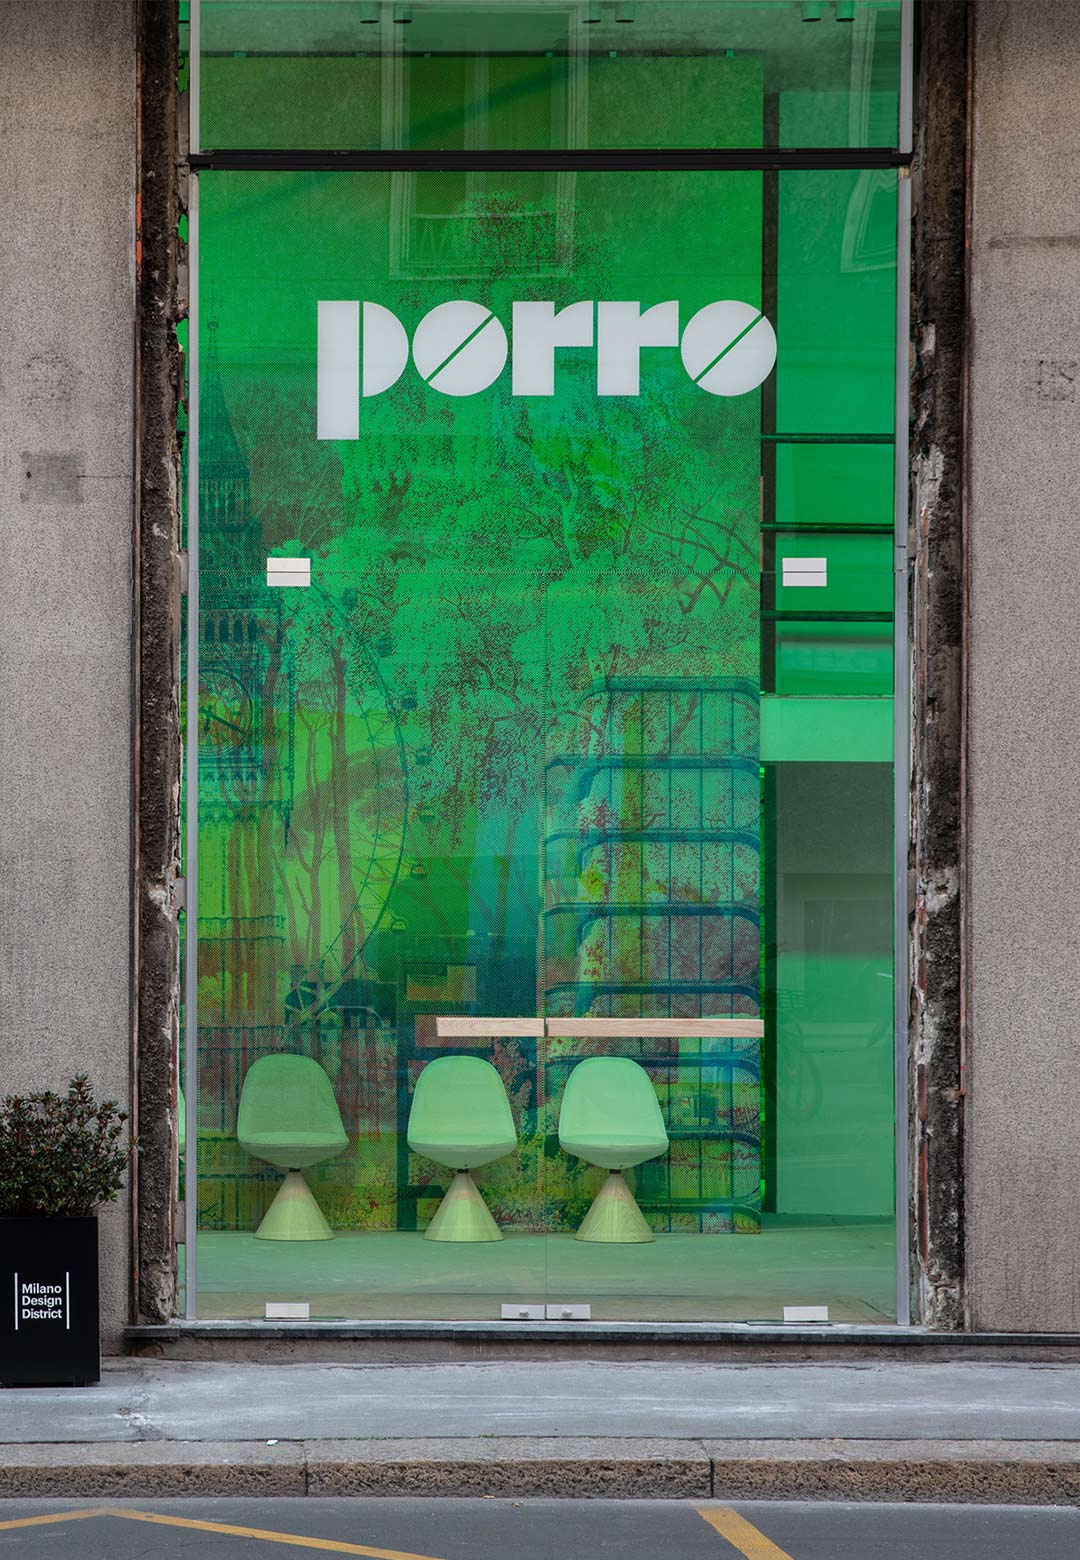 Porro’s endeavours at Milan extend a new paradigm for place, matter and colour